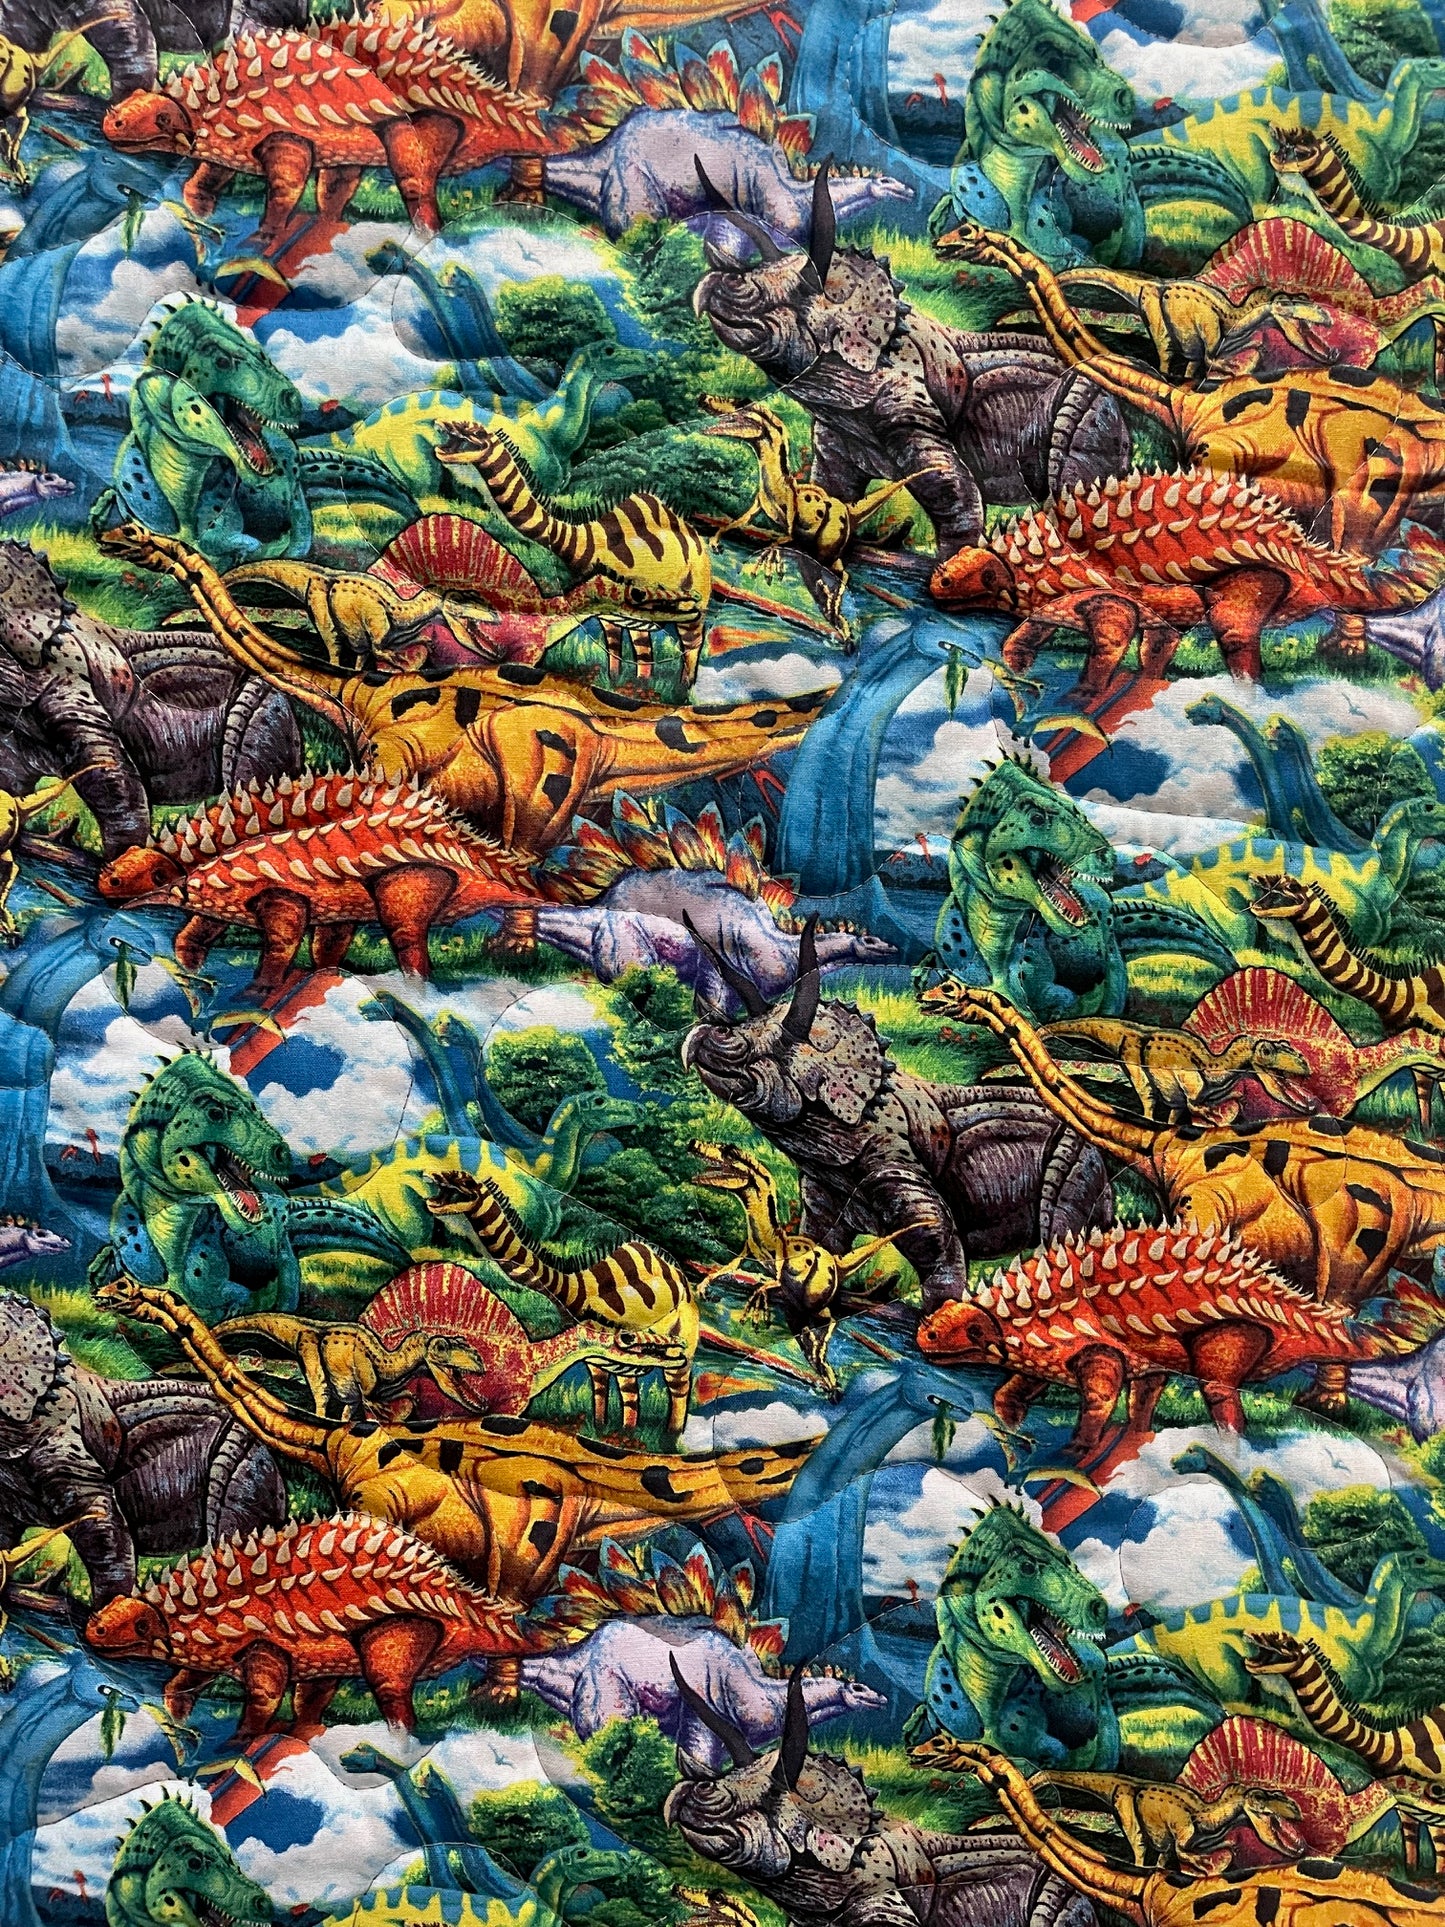 JURASSIC DINOSAURS INSPIRED QUILTED BLANKET